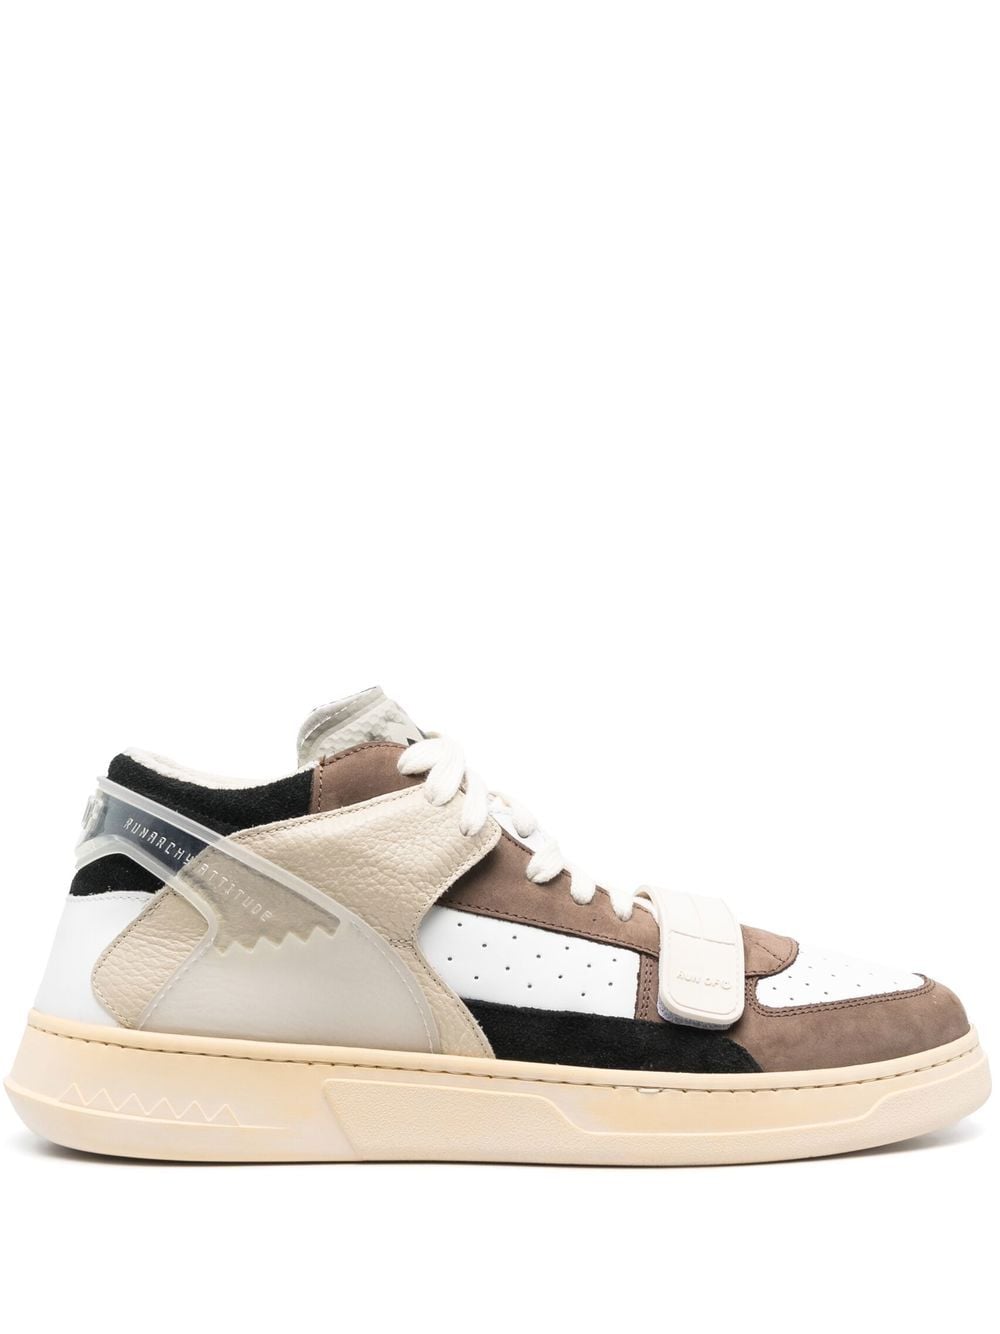 RUN OF touch-strap mid-top Sneakers - Farfetch